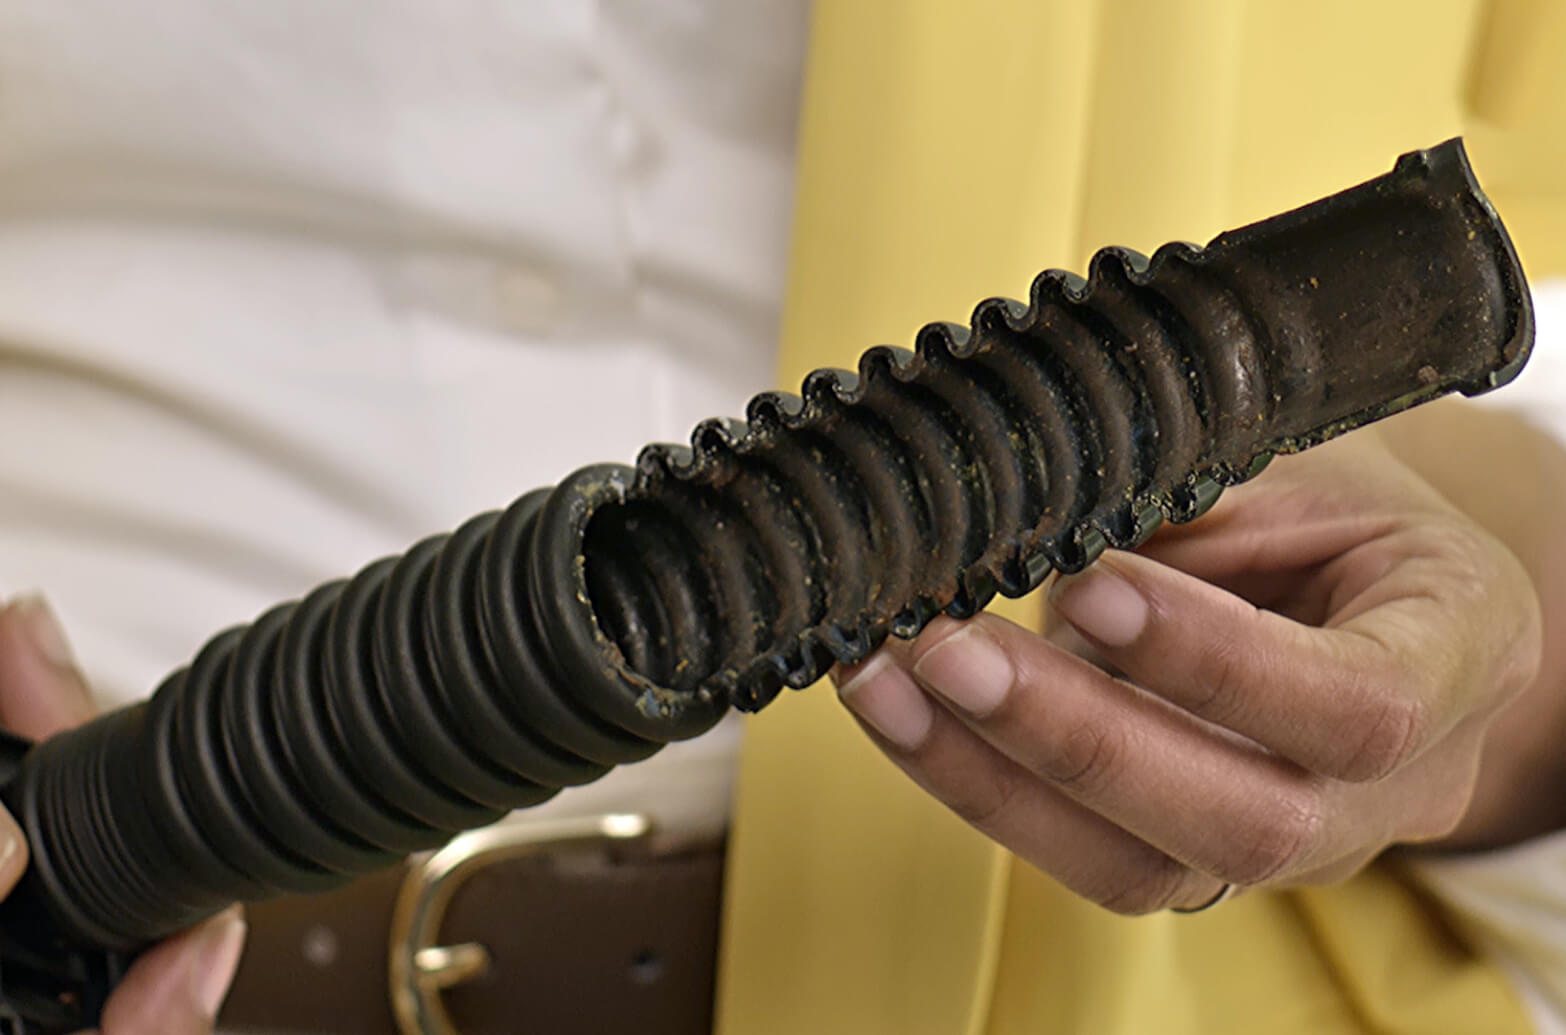 A person examines a dishwasher drain hose to see if it is damaged or clogged.